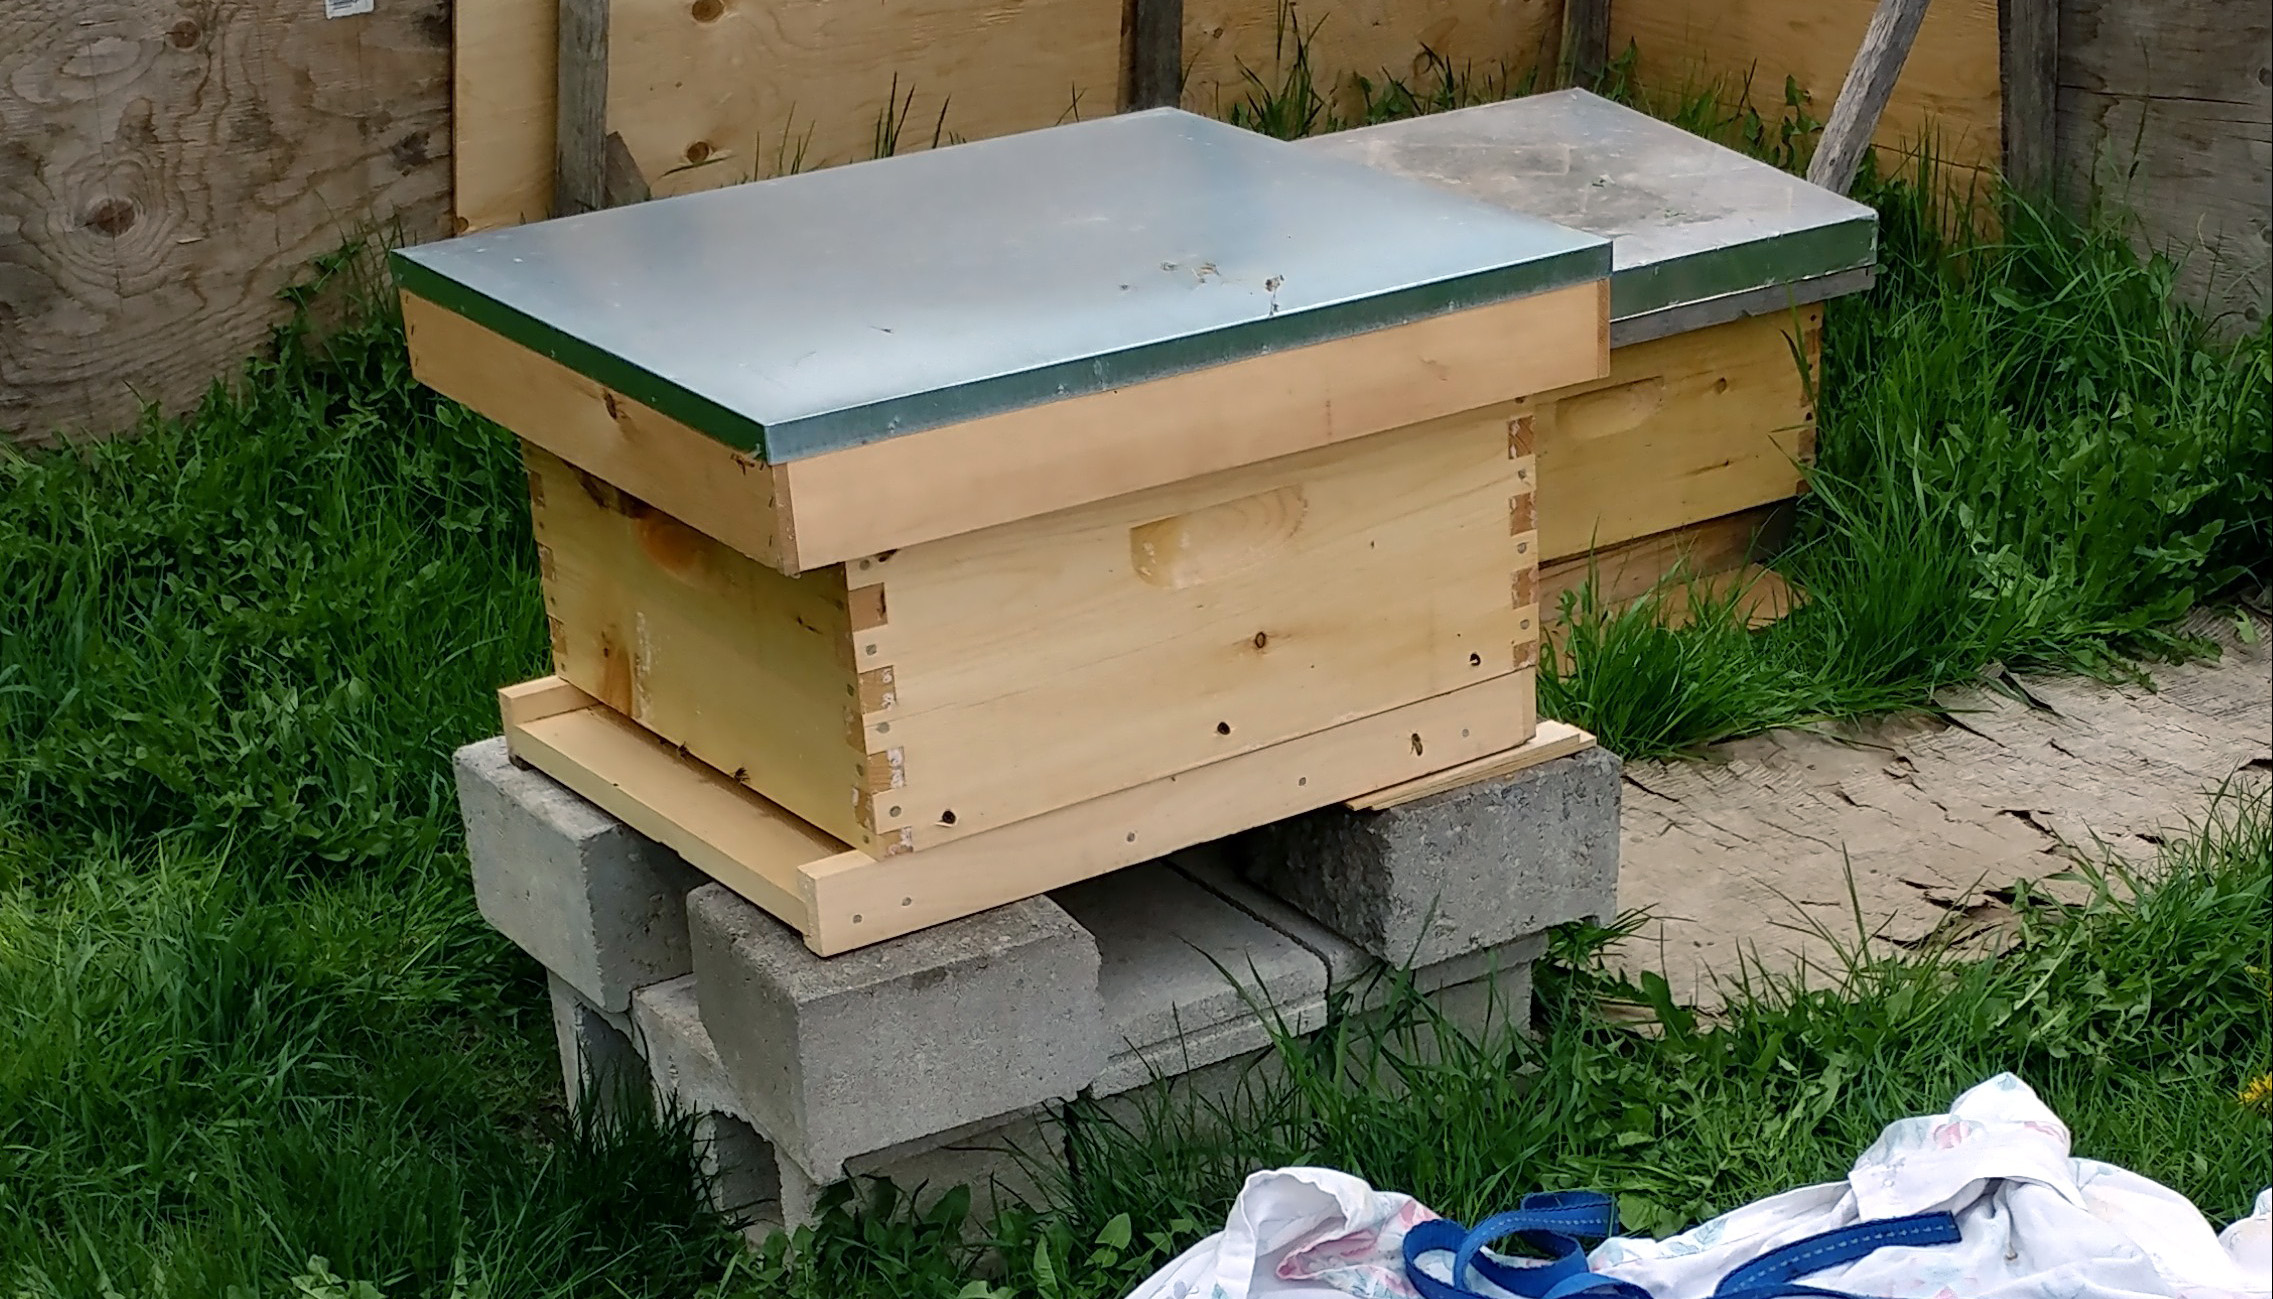 New hive for new swarm of bees